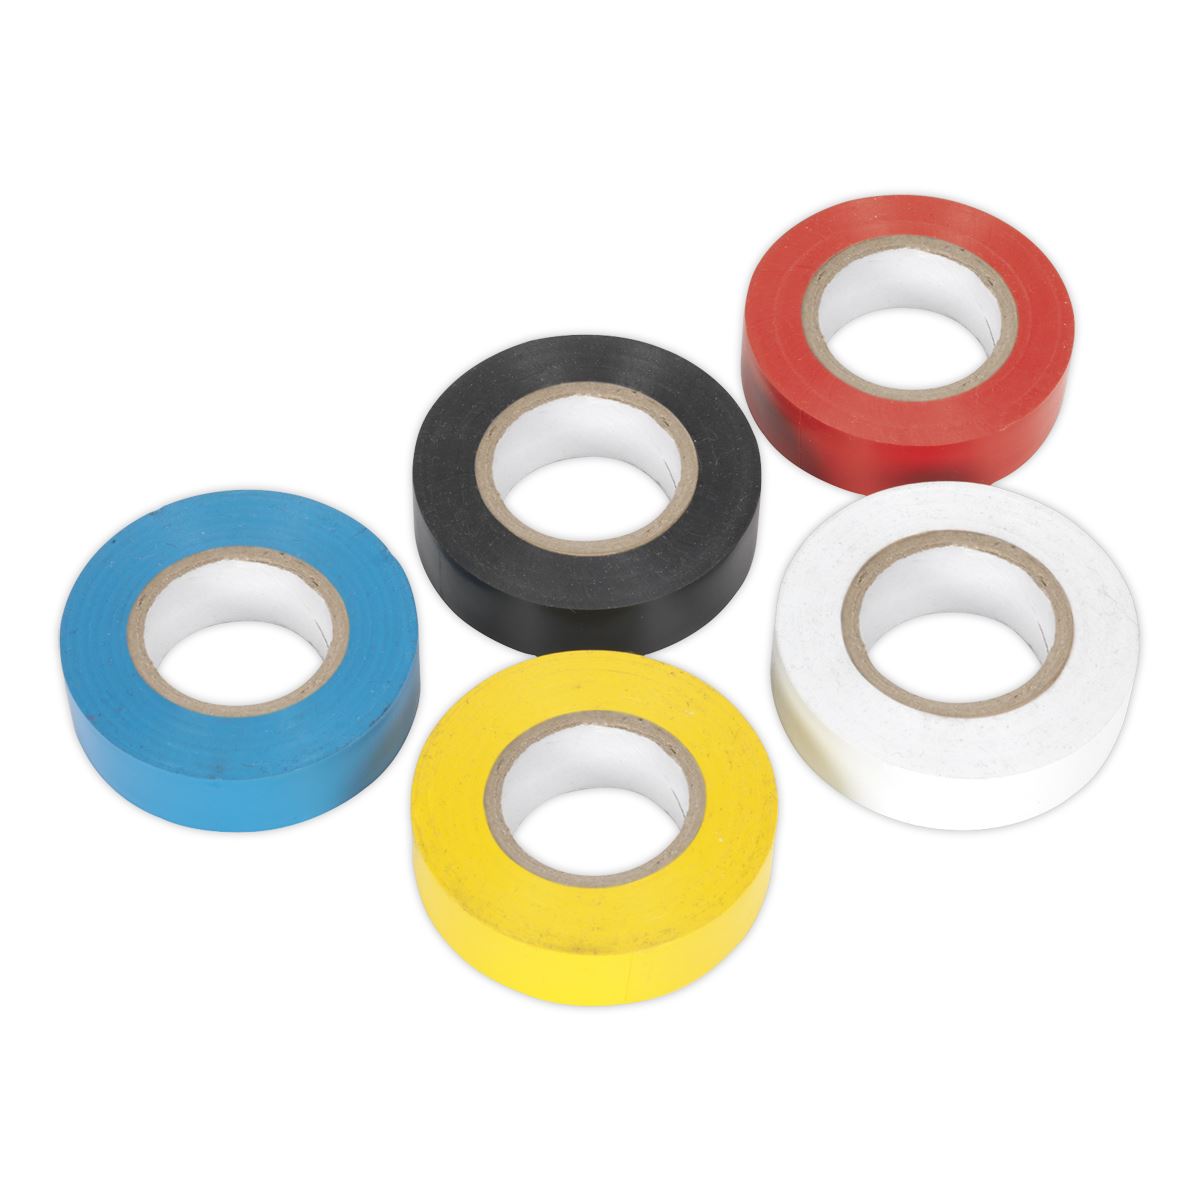 Sealey PVC Insulating Tape 19mm x 20m Mixed Colours Pack of 10